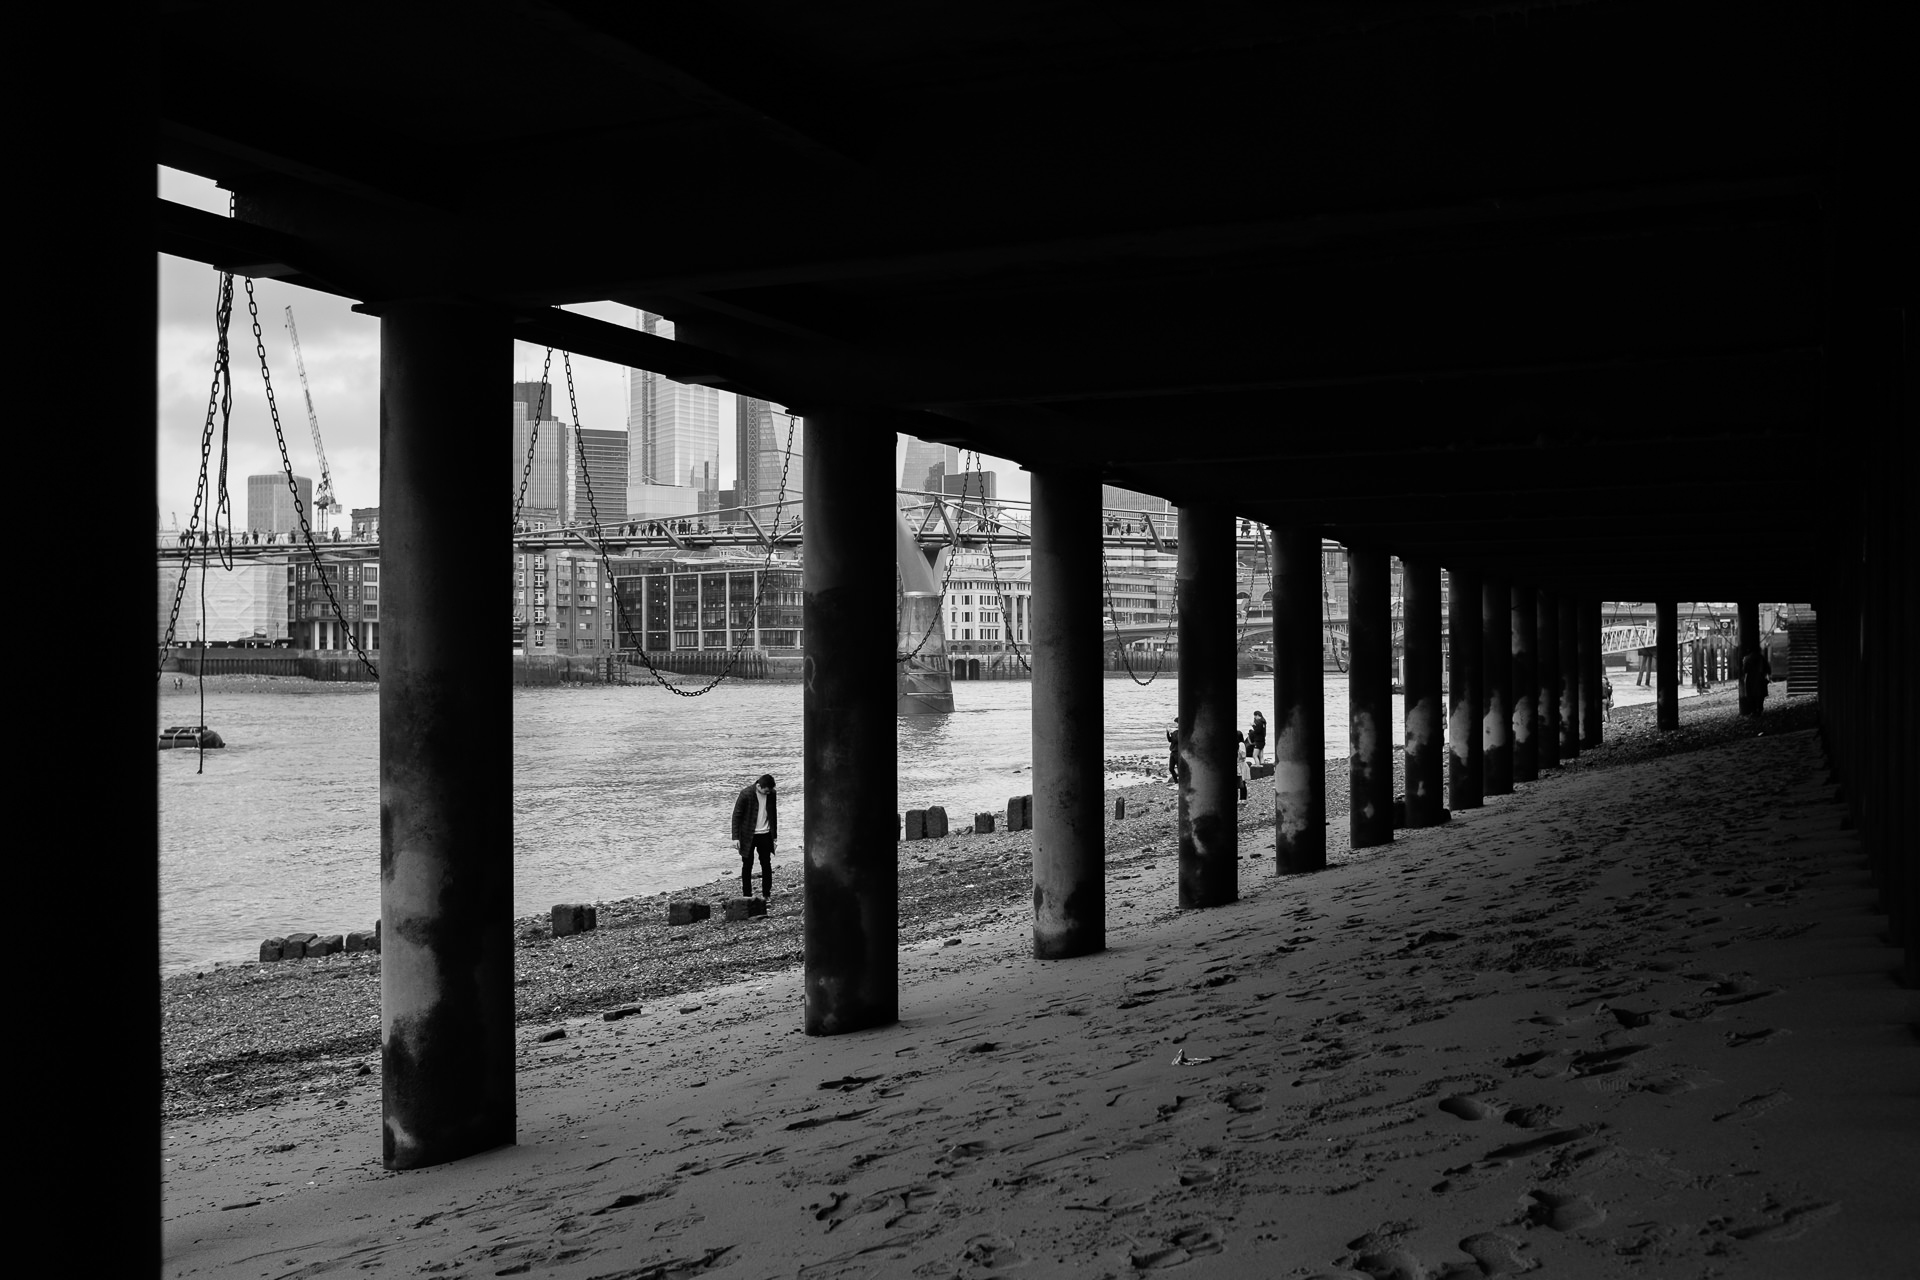 Low tide on the River Thames